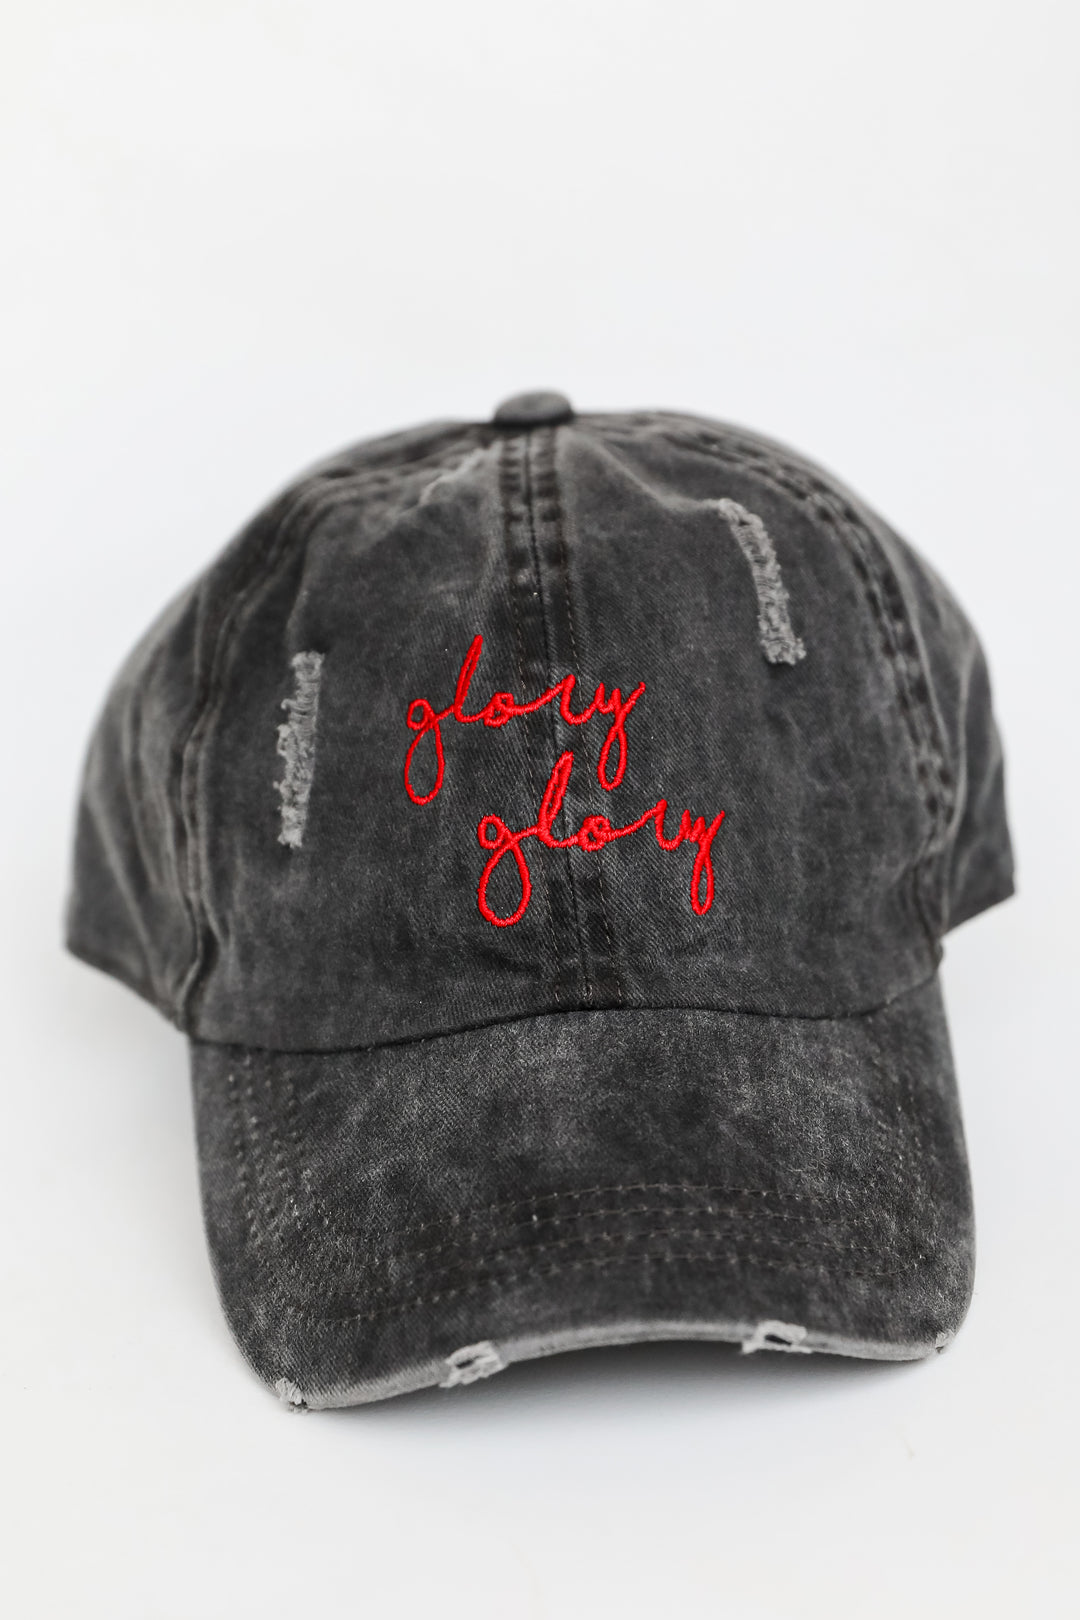 Glory Glory Script Embroidered Hat uga hats online